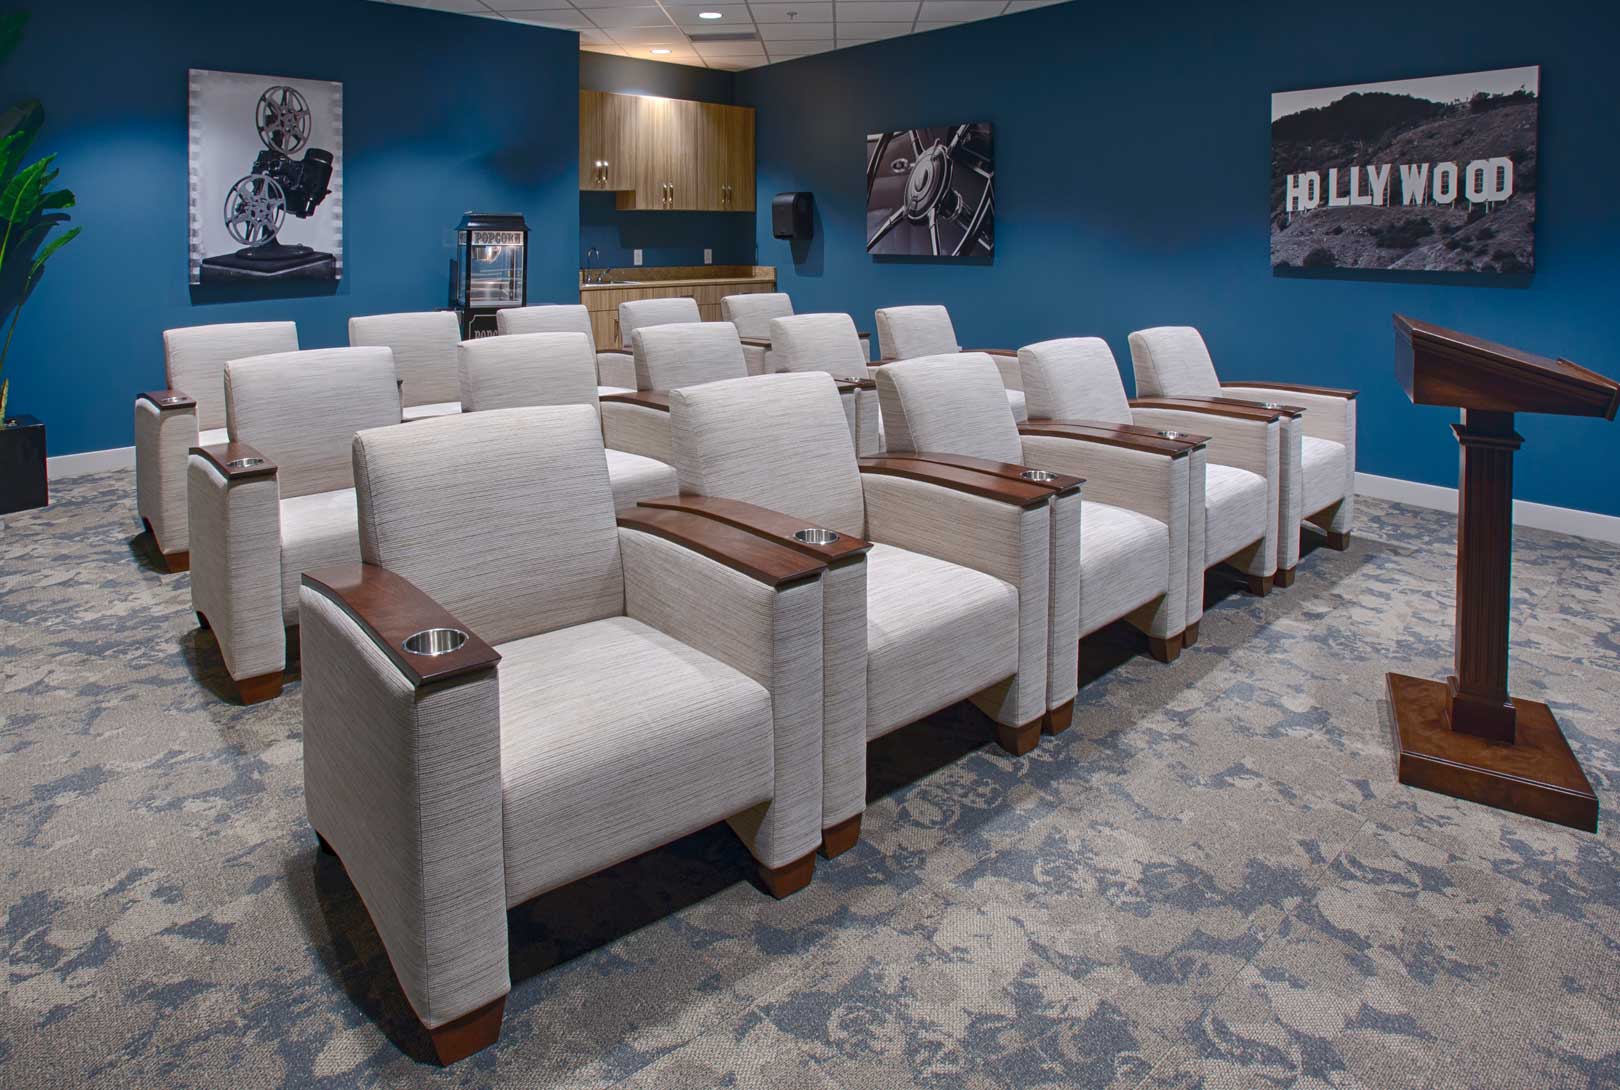 theater room with blue walls, white theater chairs, a podium, and Hollywood imagery on the walls